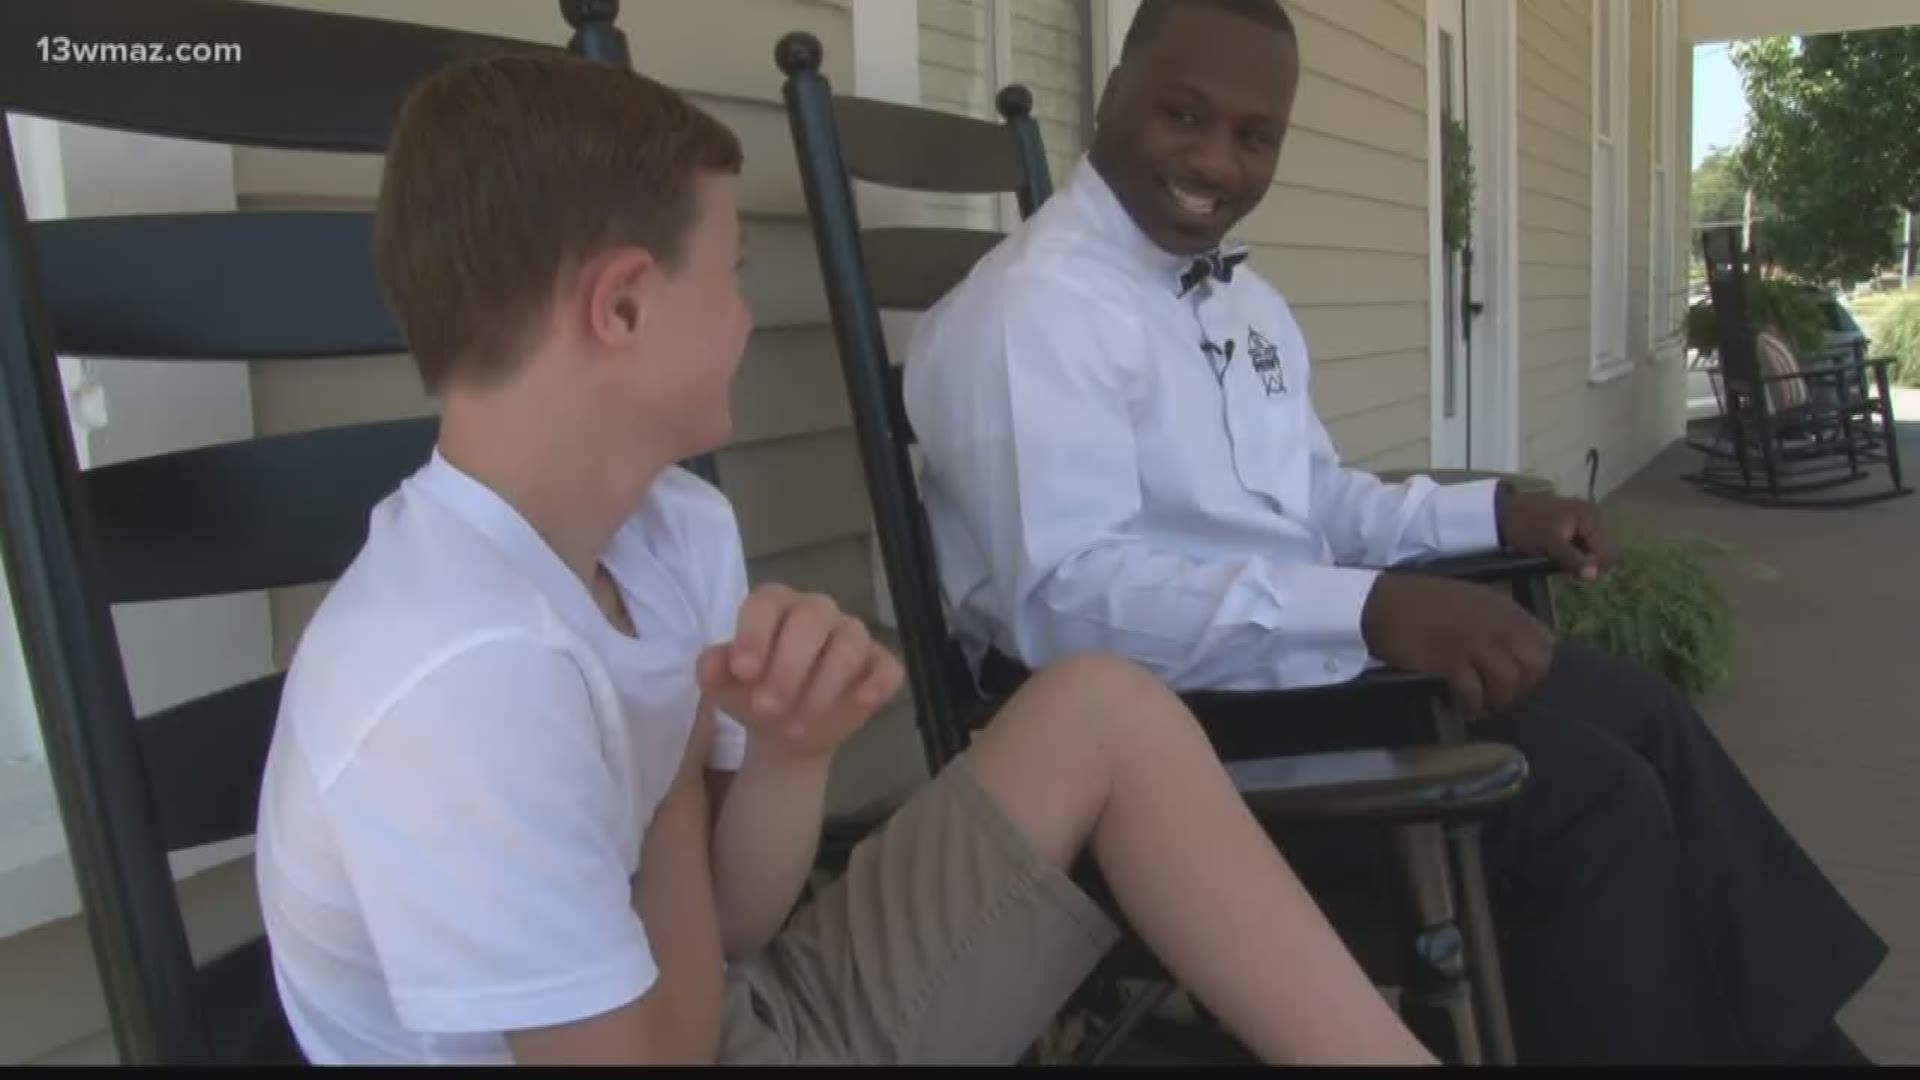 The friendship between Northwest Laurens Elementary School Resource Officer Demetrius Green and special needs student Carter Haskins started with a simple high five. About eight months later, and that bond has only grown stronger, leading Green to ask Carter to participate on one of the biggest days of his life.